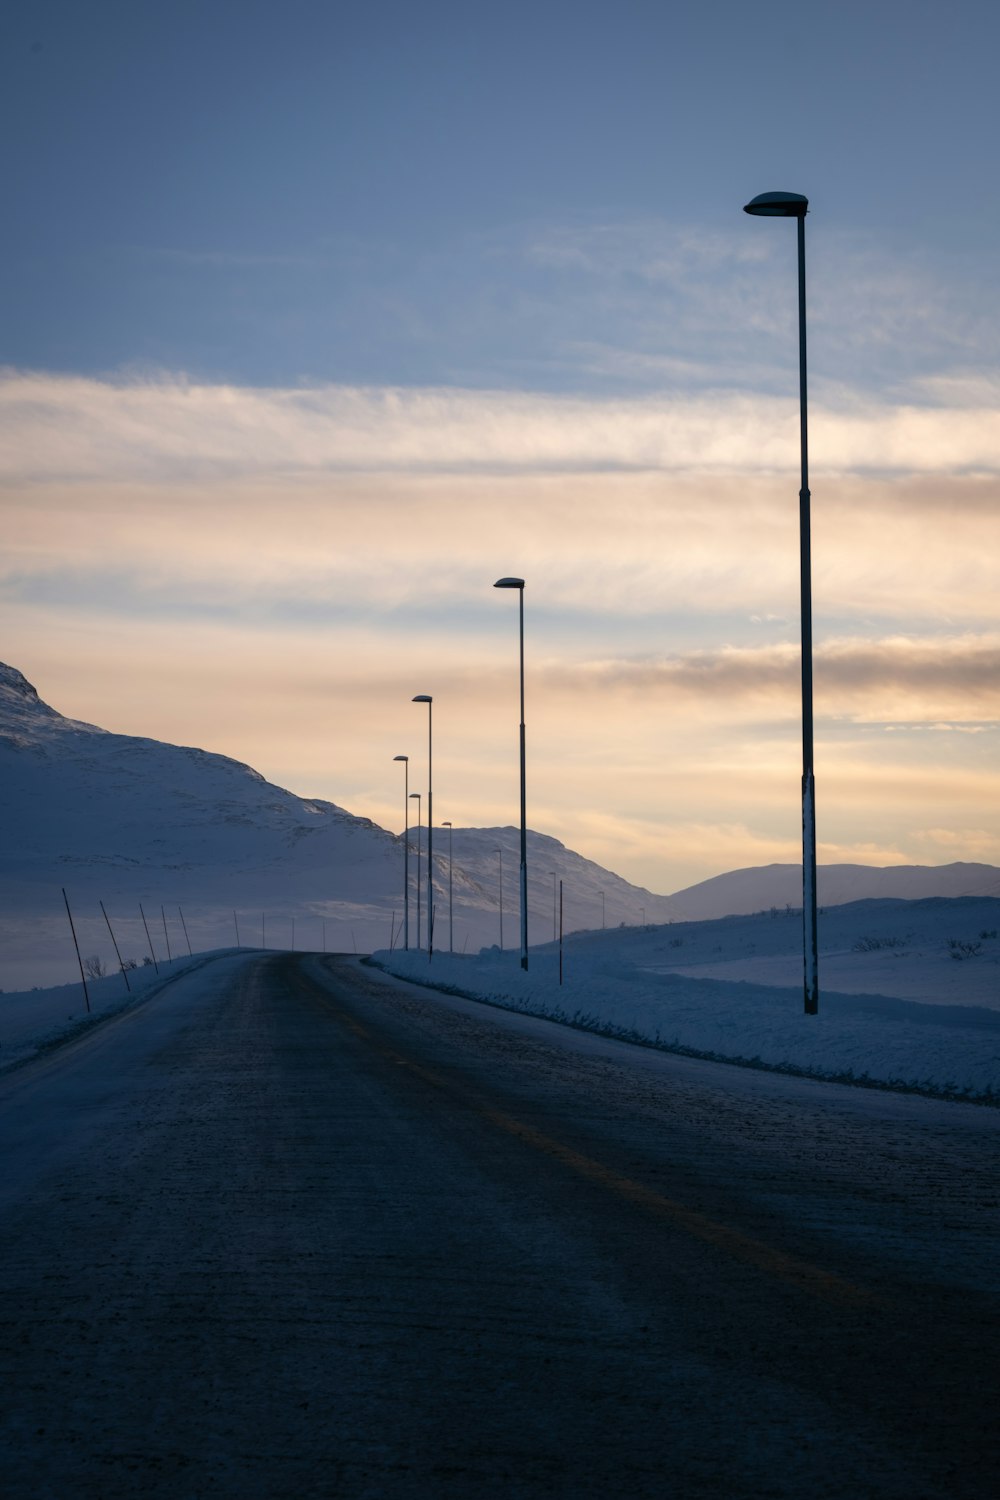 a road with street lights and snow on the ground